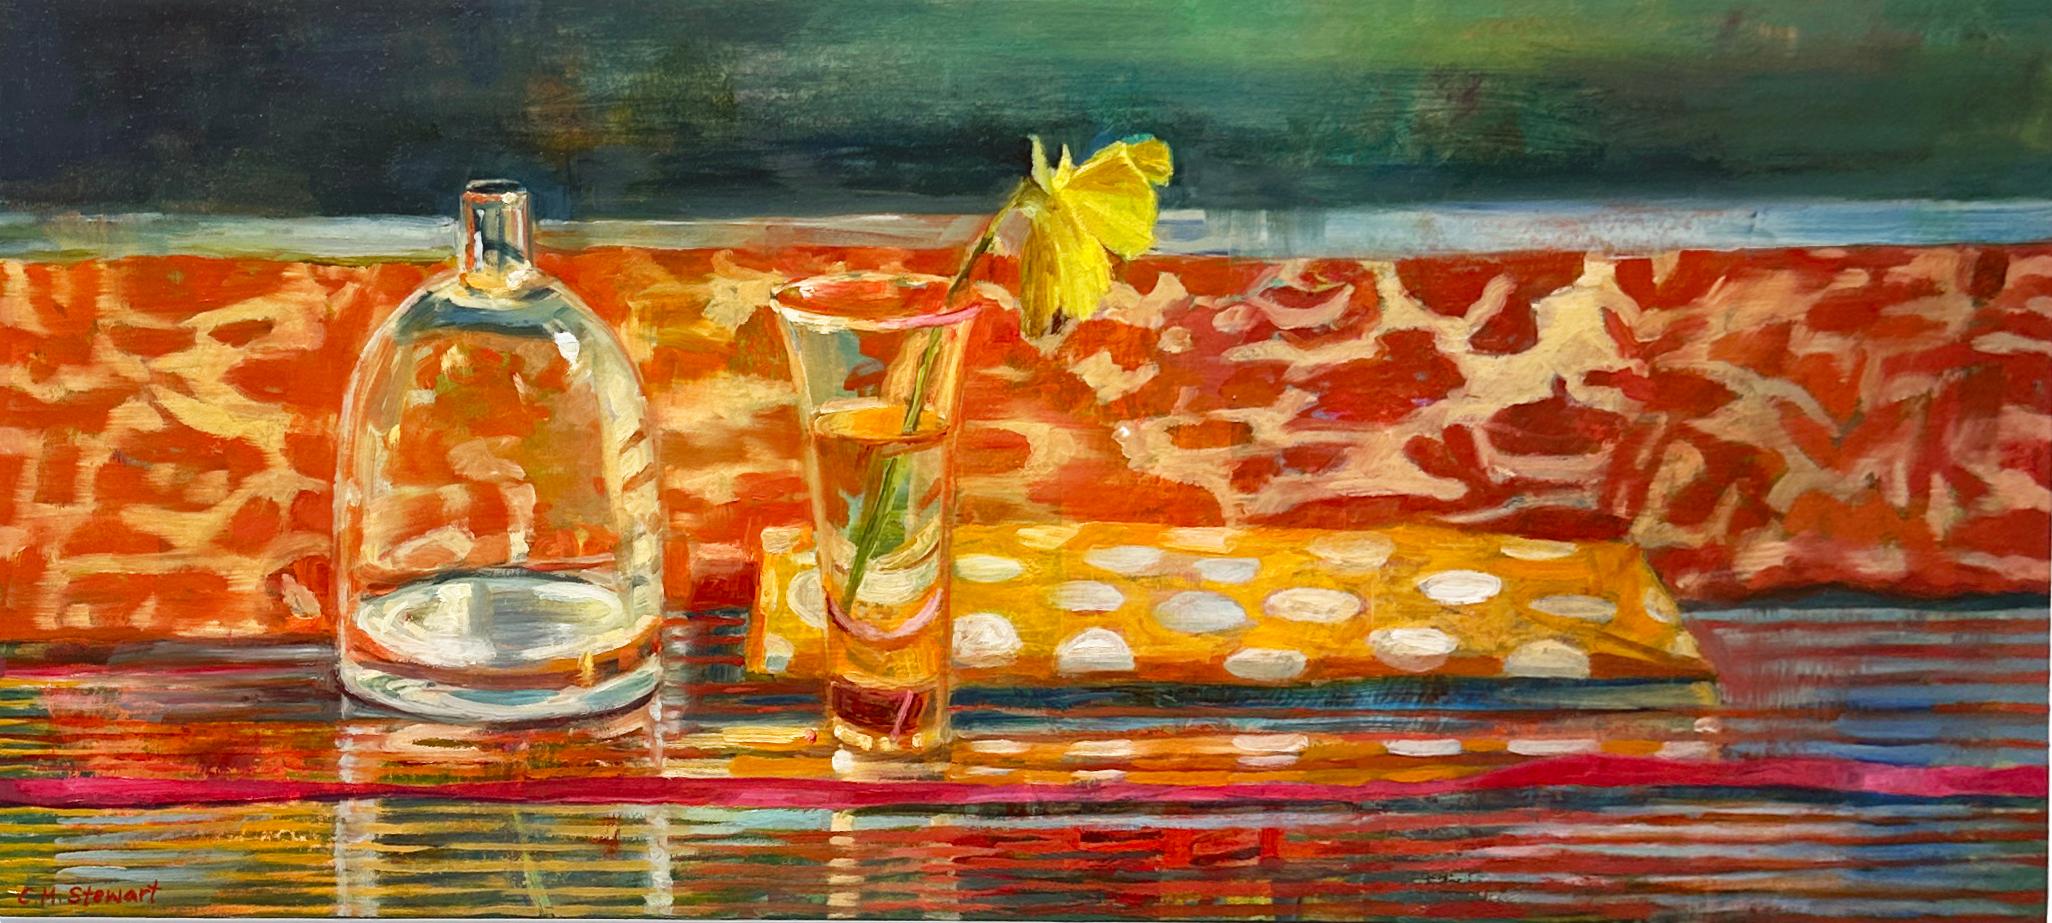 Carol Stewart Interior Painting - Pansy and Patterns - Vibrantly Patterned Fabric, Reflective Glassware & a Pansy